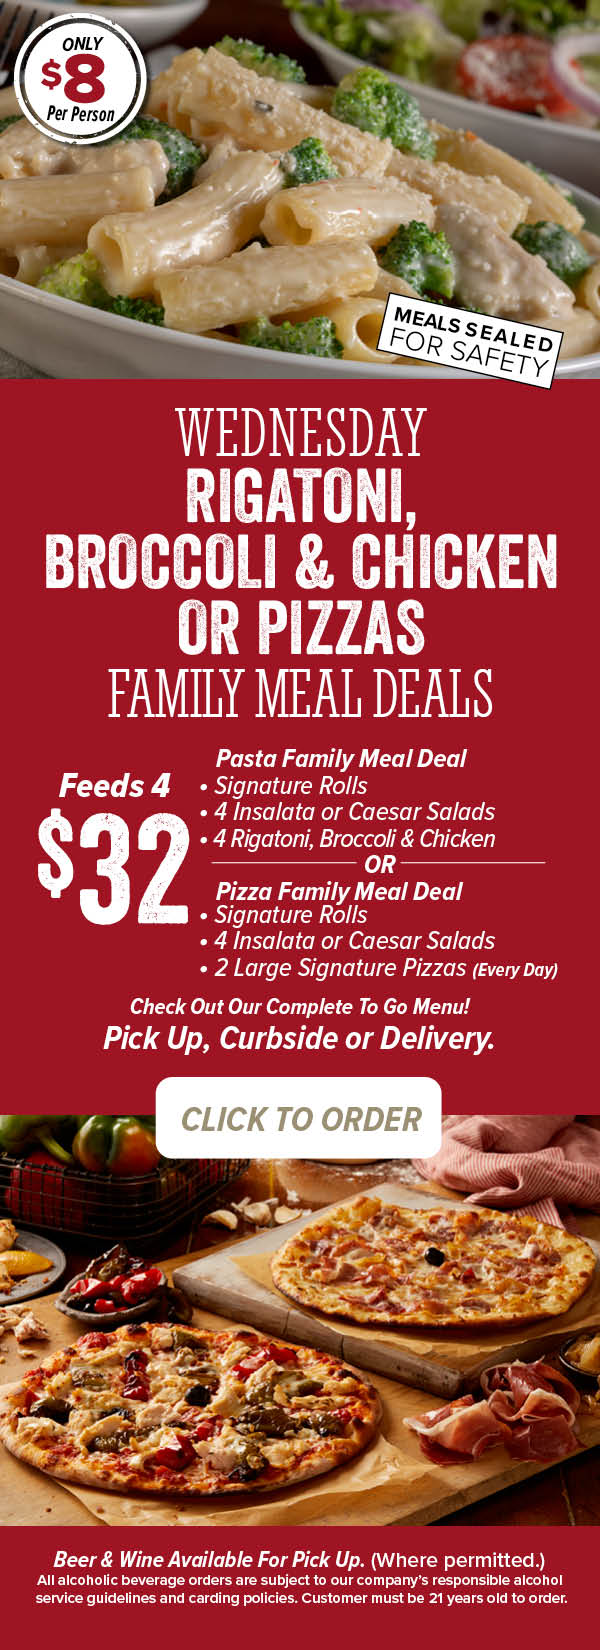 Wednesday - Rigatoni, Broccoli & Chicken Family Meal Deal - $8 per person. Click to order